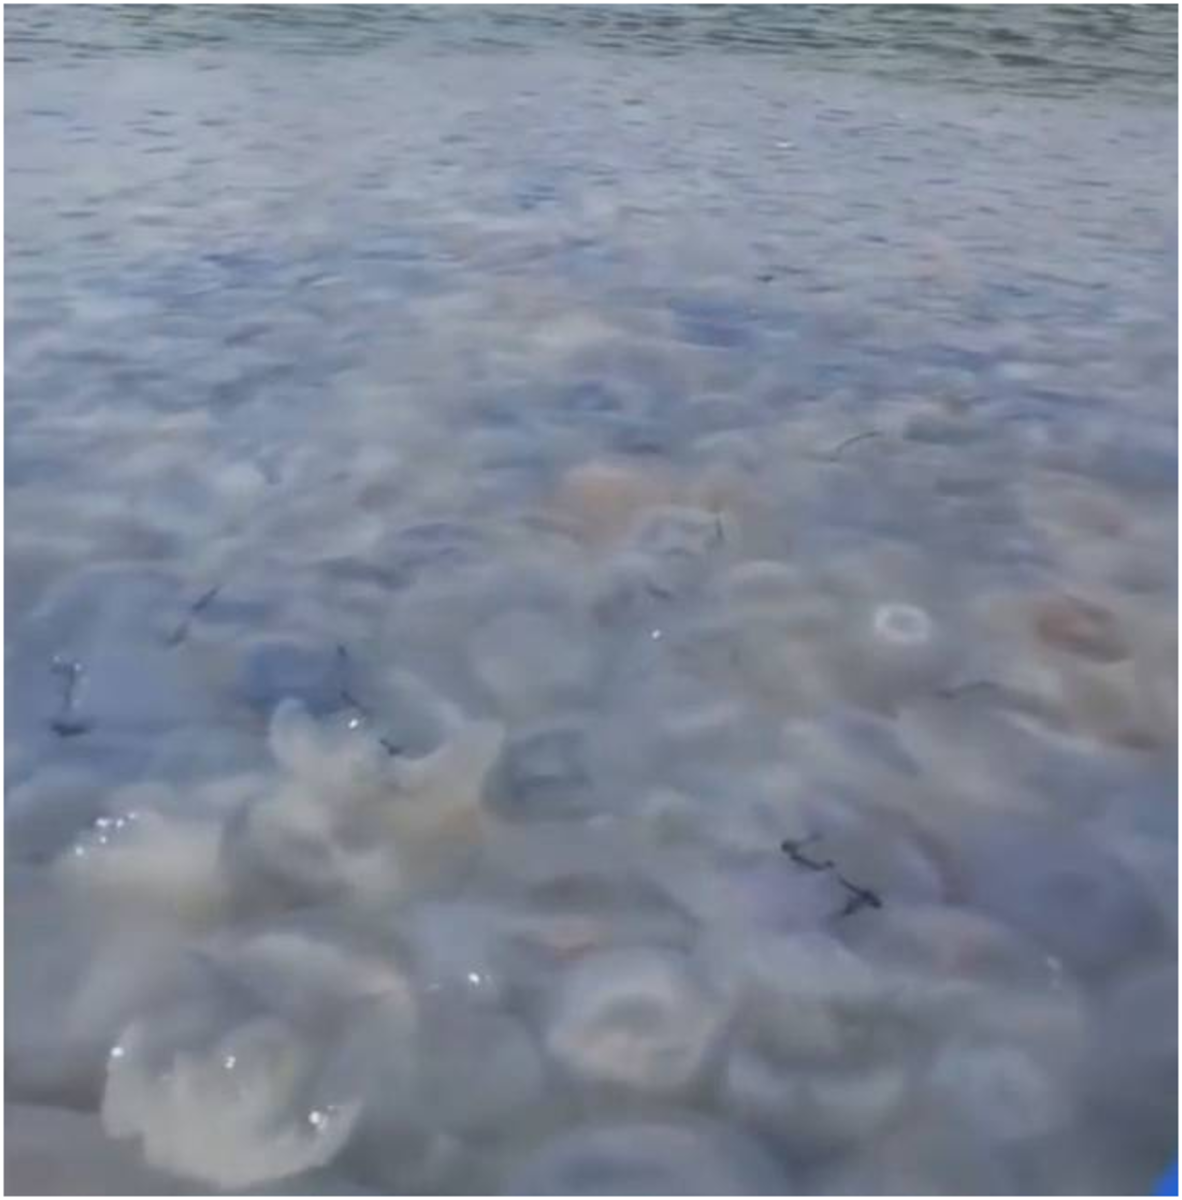 Jellyfish and Resort Summer in 2020, the Sea of Azov